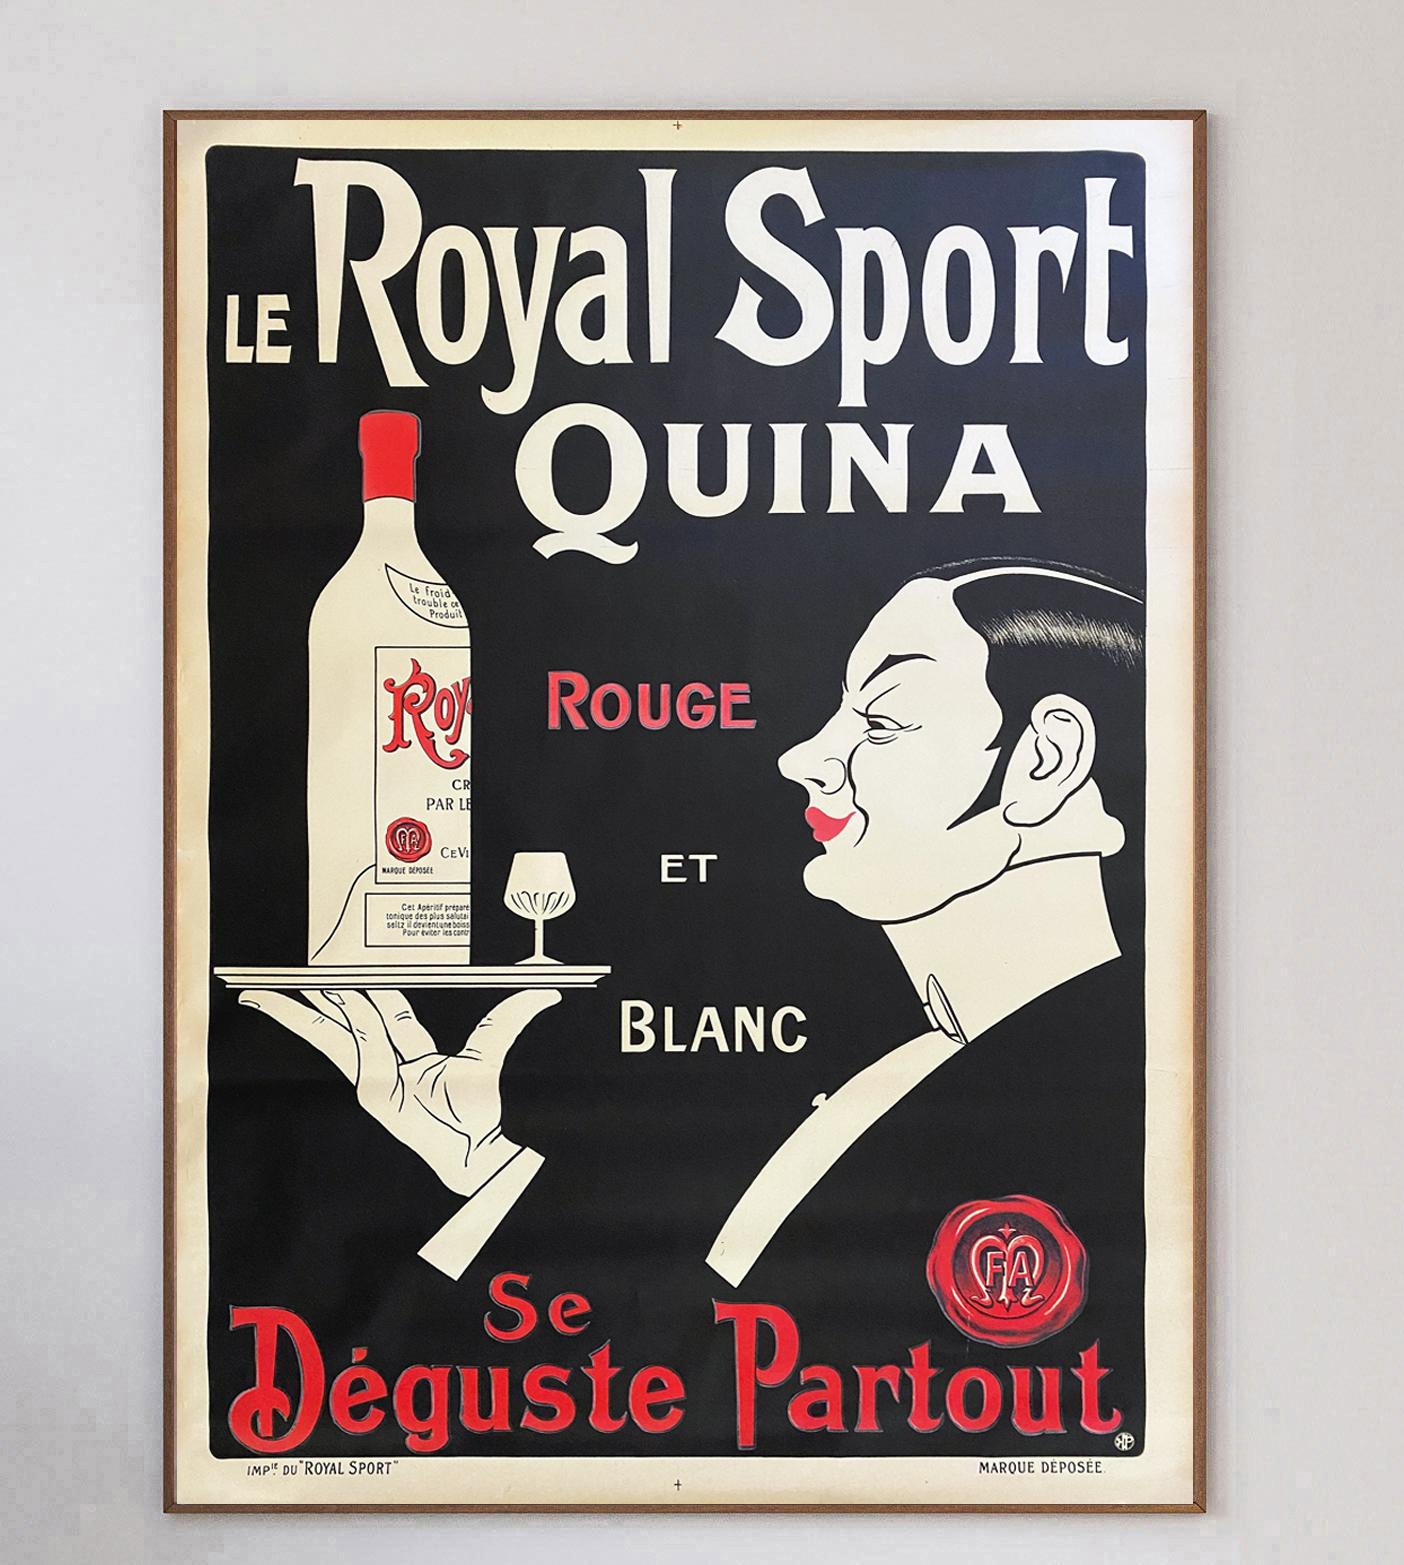 Beautiful poster created for Le Royal Sport Quina in 1920. Reading 